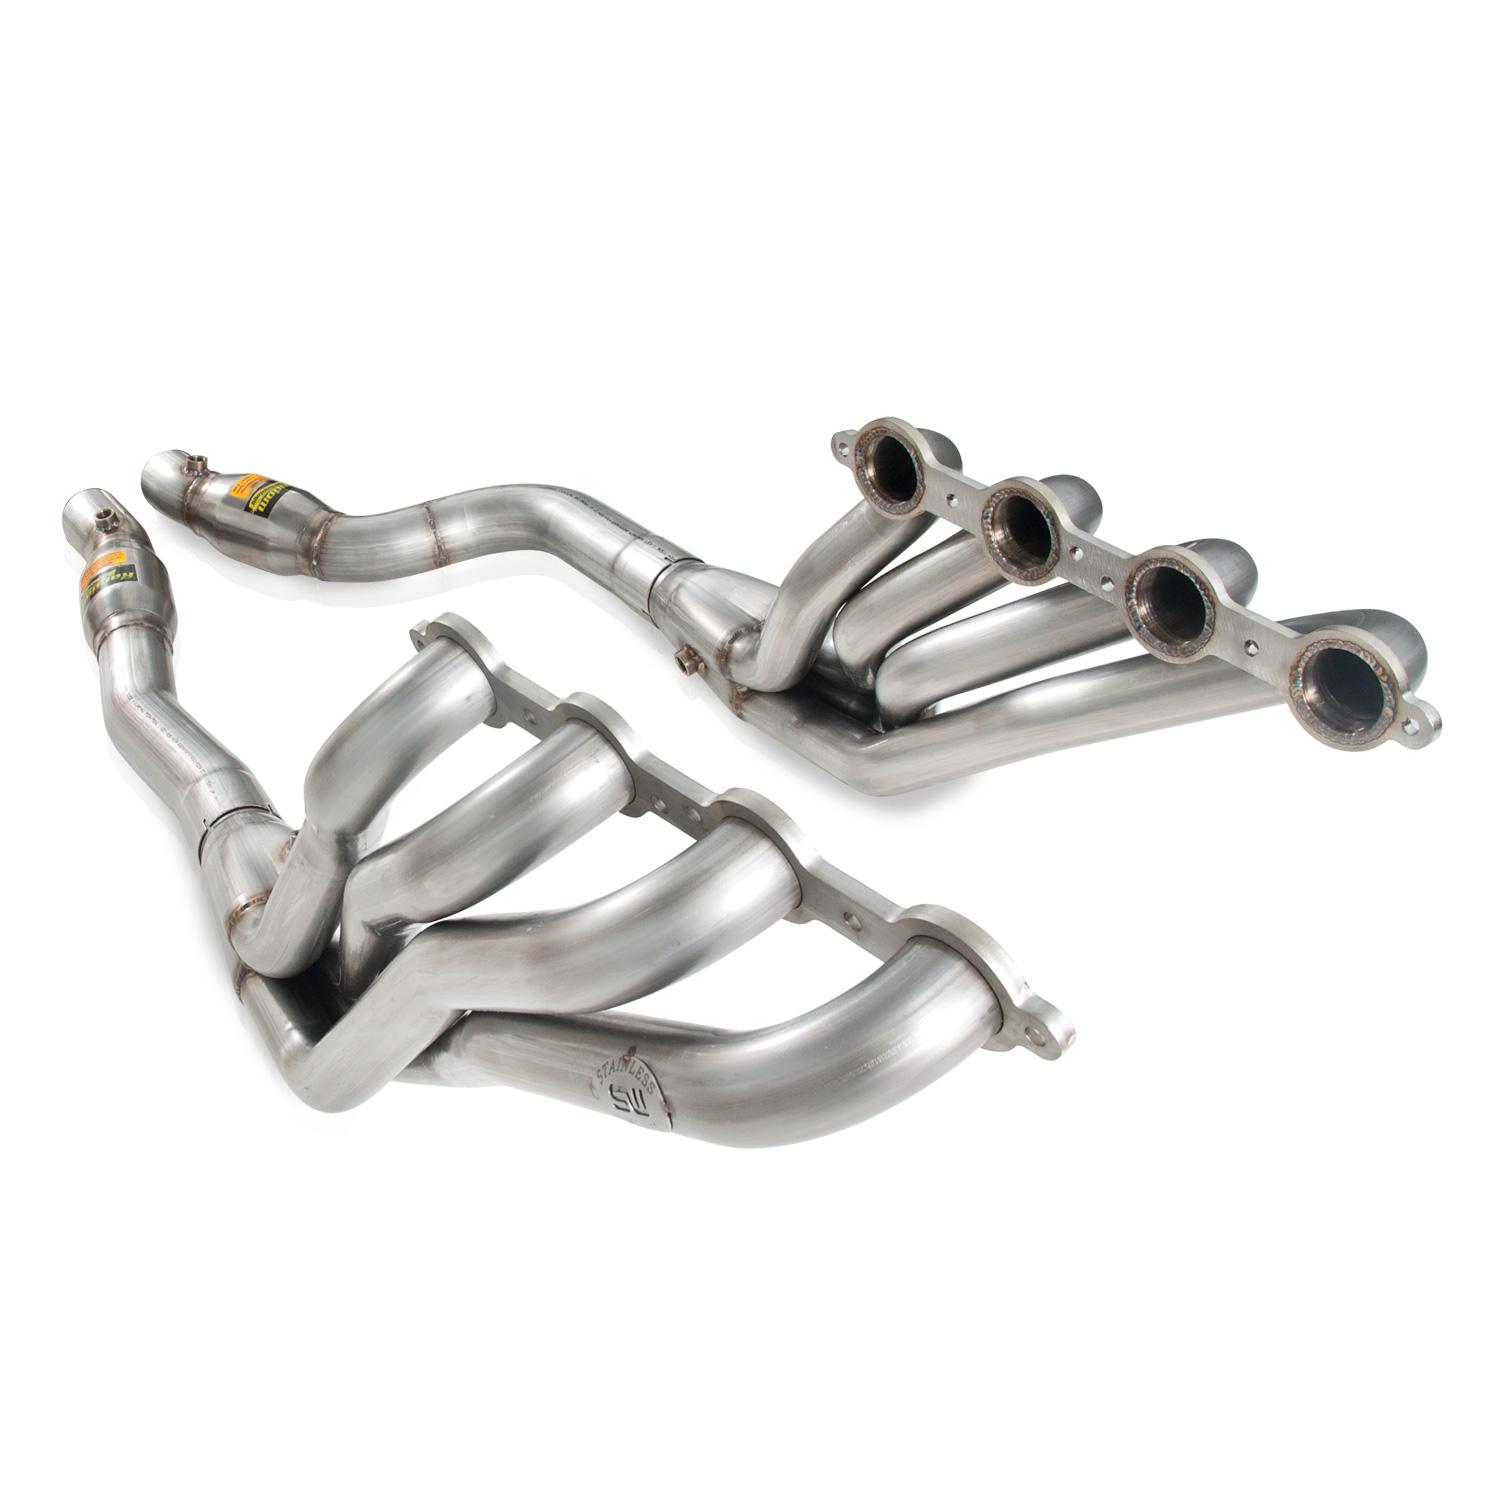 2009-2015 Cadillac CTS-V Stainless Works Long Tube Headers w/Catalytic Converters (For Stainless Works Exhaust)